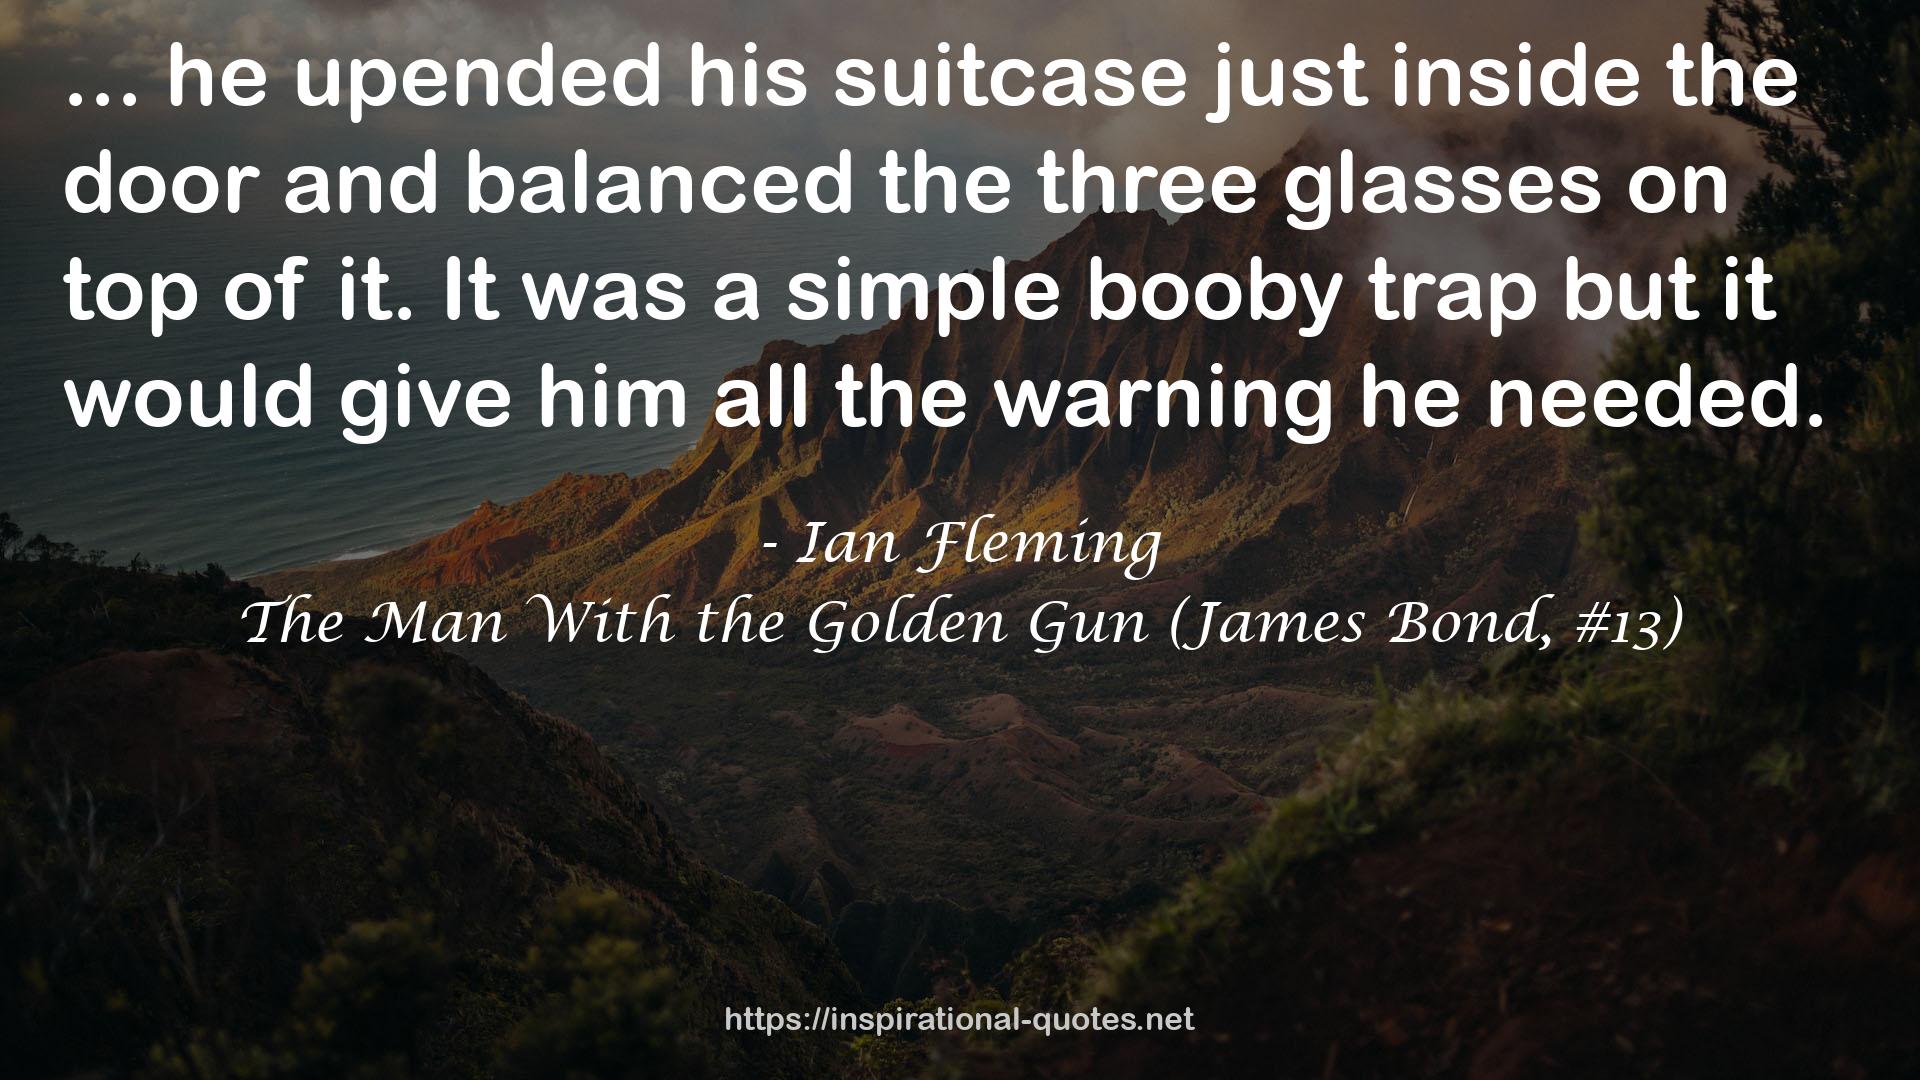 The Man With the Golden Gun (James Bond, #13) QUOTES